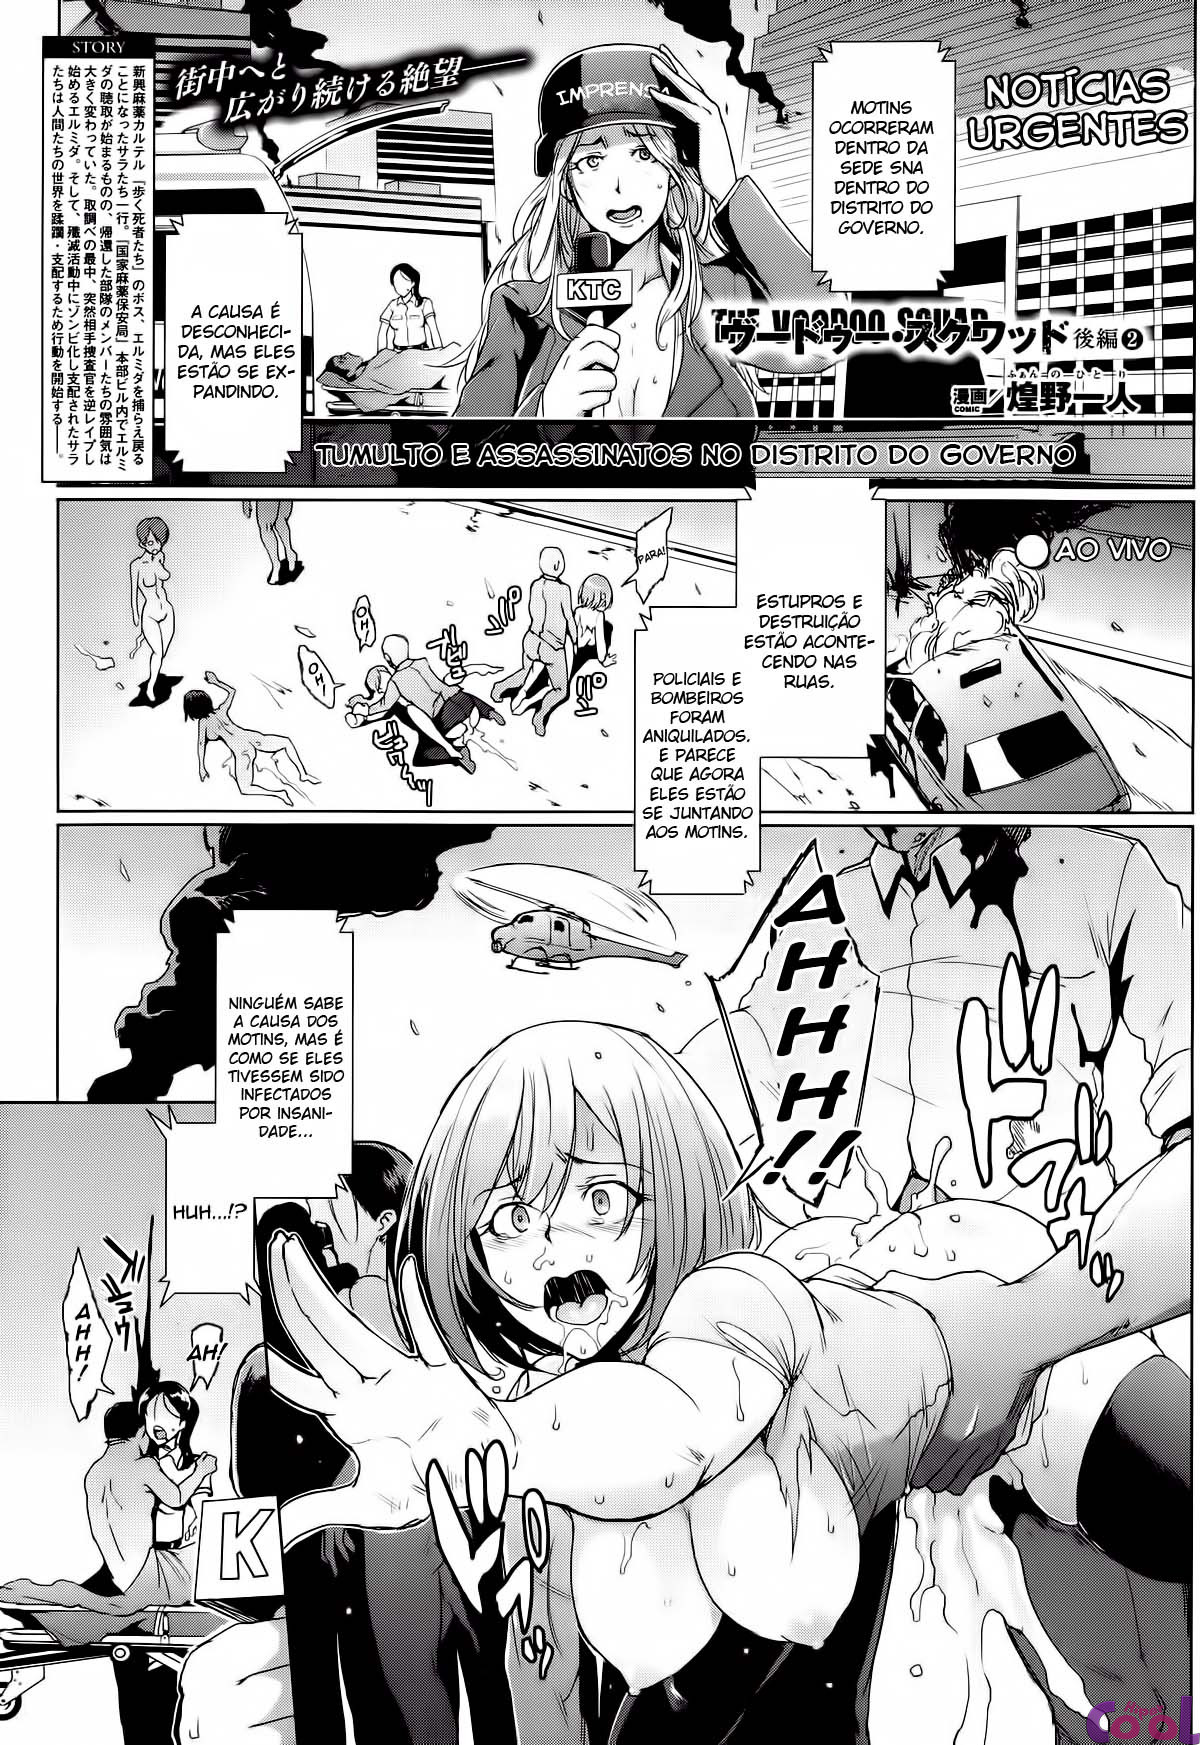 the-voodoo-squad-kouhen-chapter-01-page-09.jpg